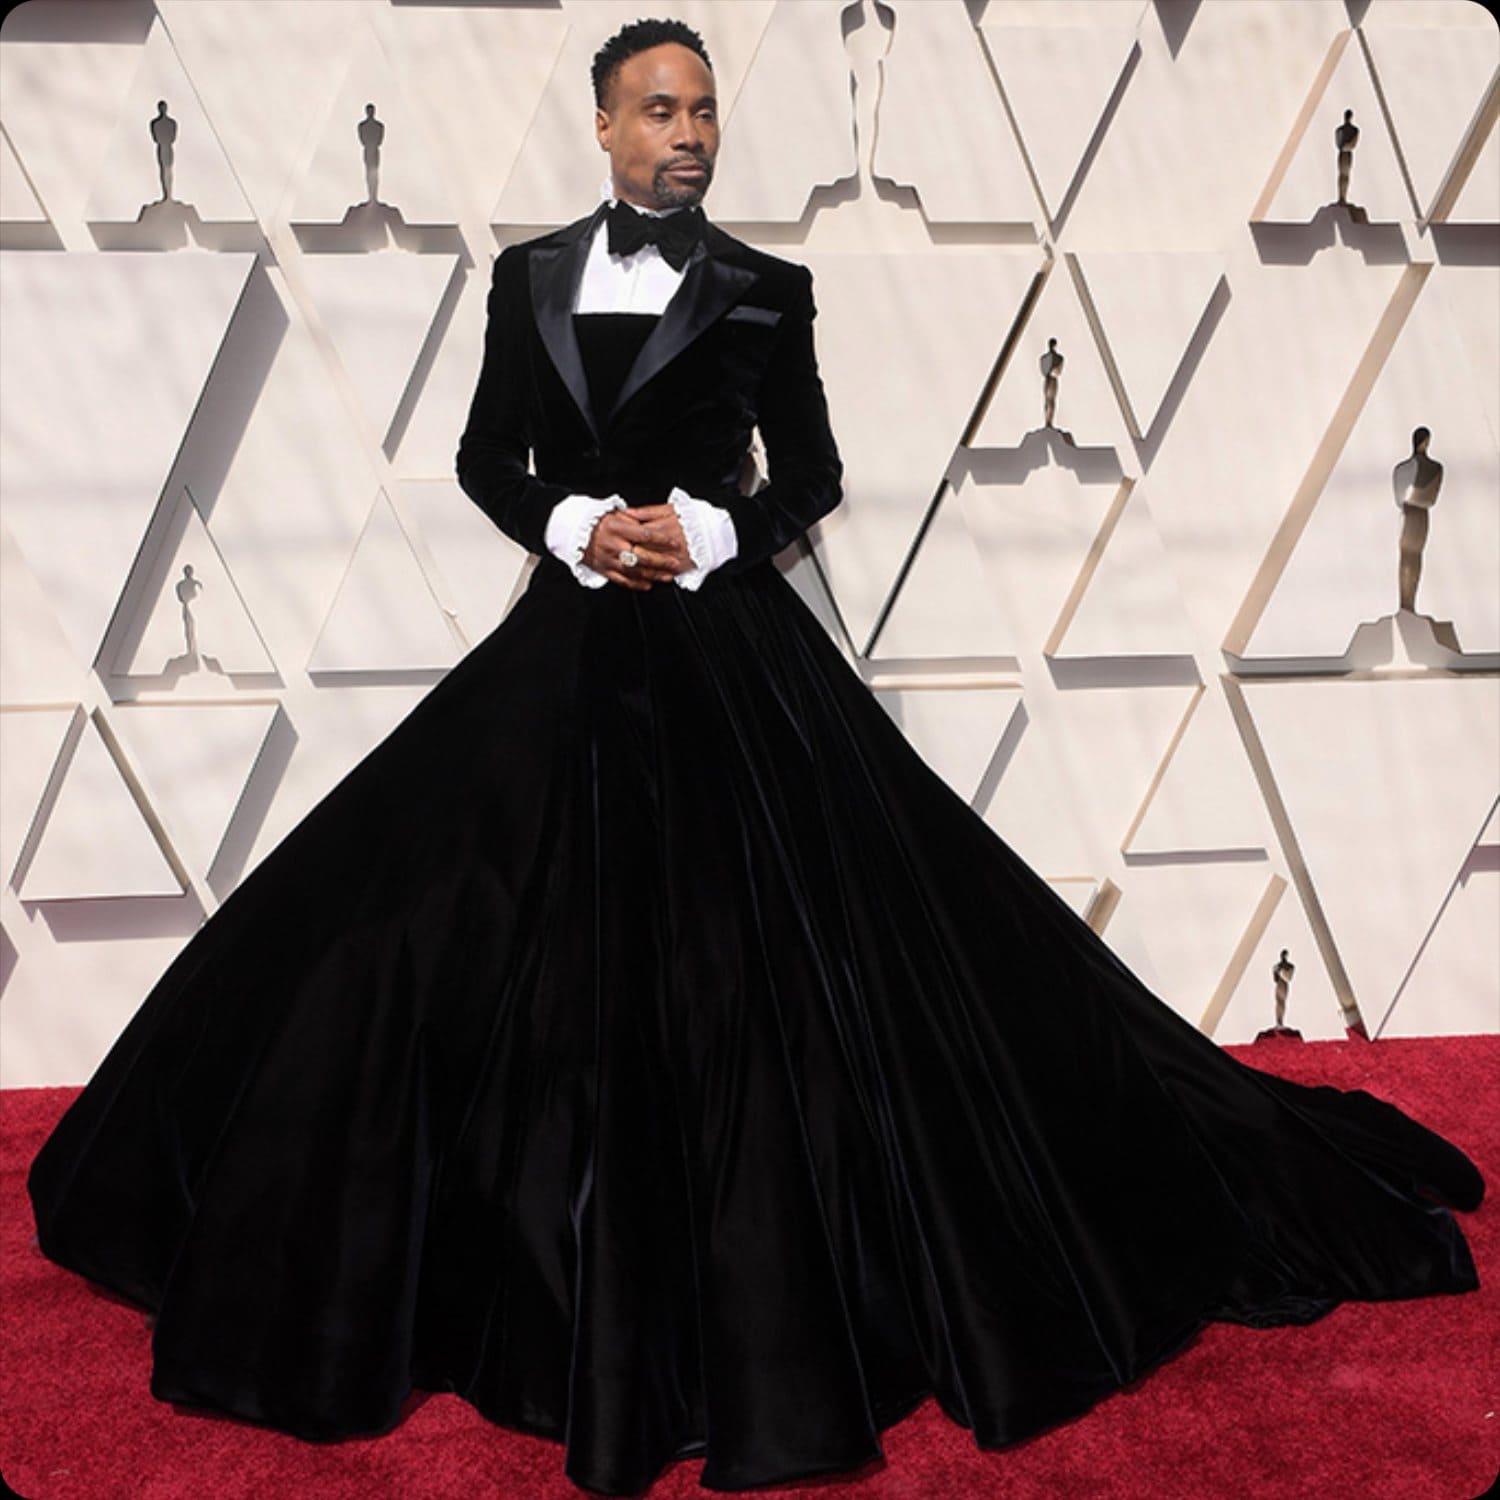 Billy Porter in tuxedo-gown of Christian Siriano Oscars 2019 by RUNWAY MAGAZINE